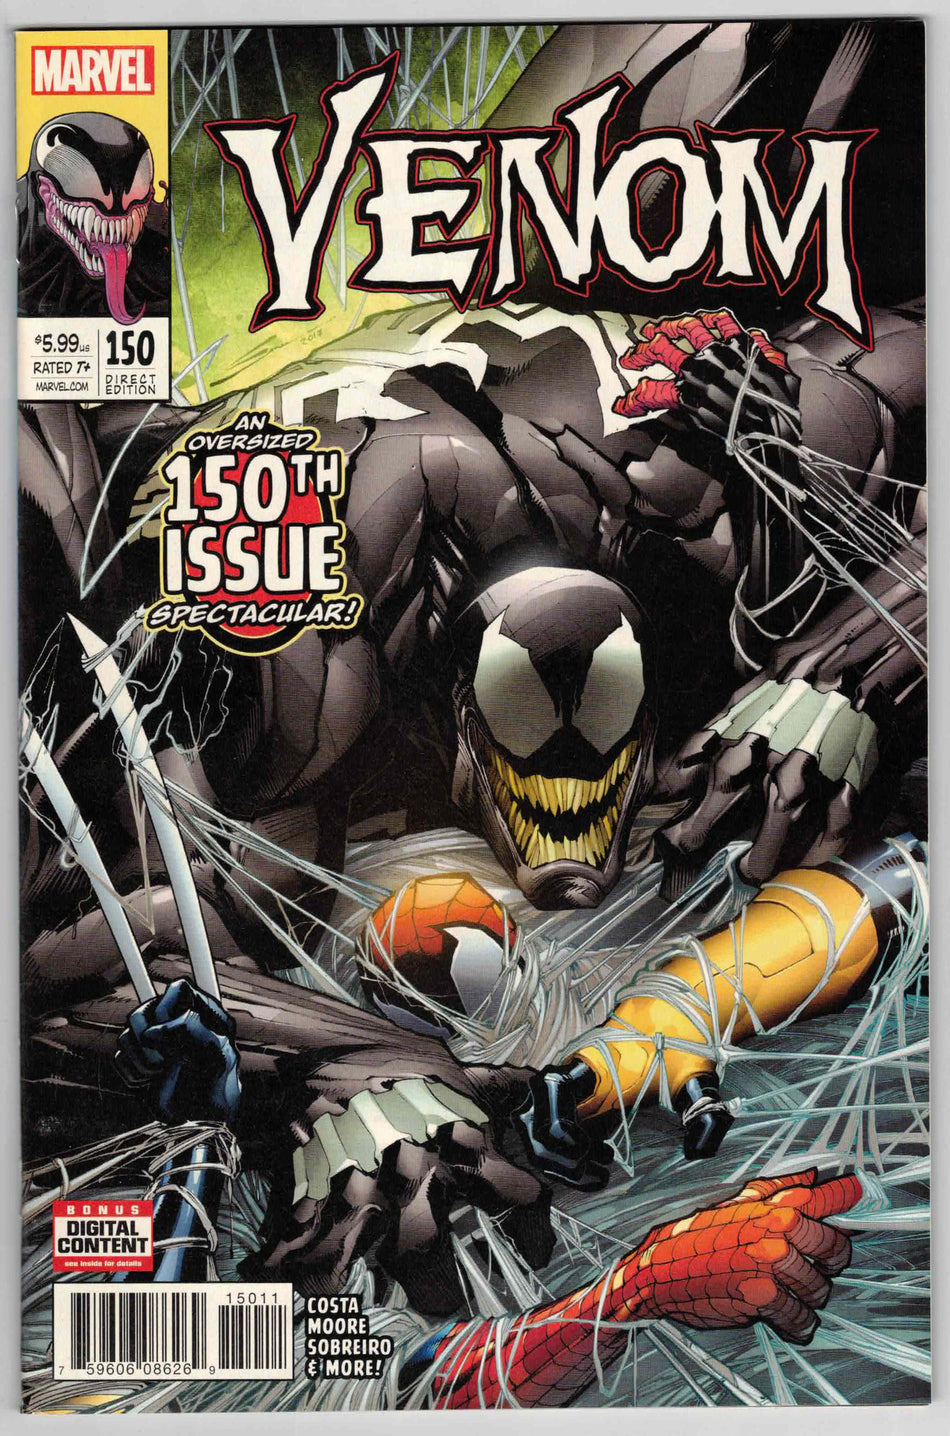 Photo of Venom, Vol. 3 (2017) Issue 150A - Near Mint Comic sold by Stronghold Collectibles